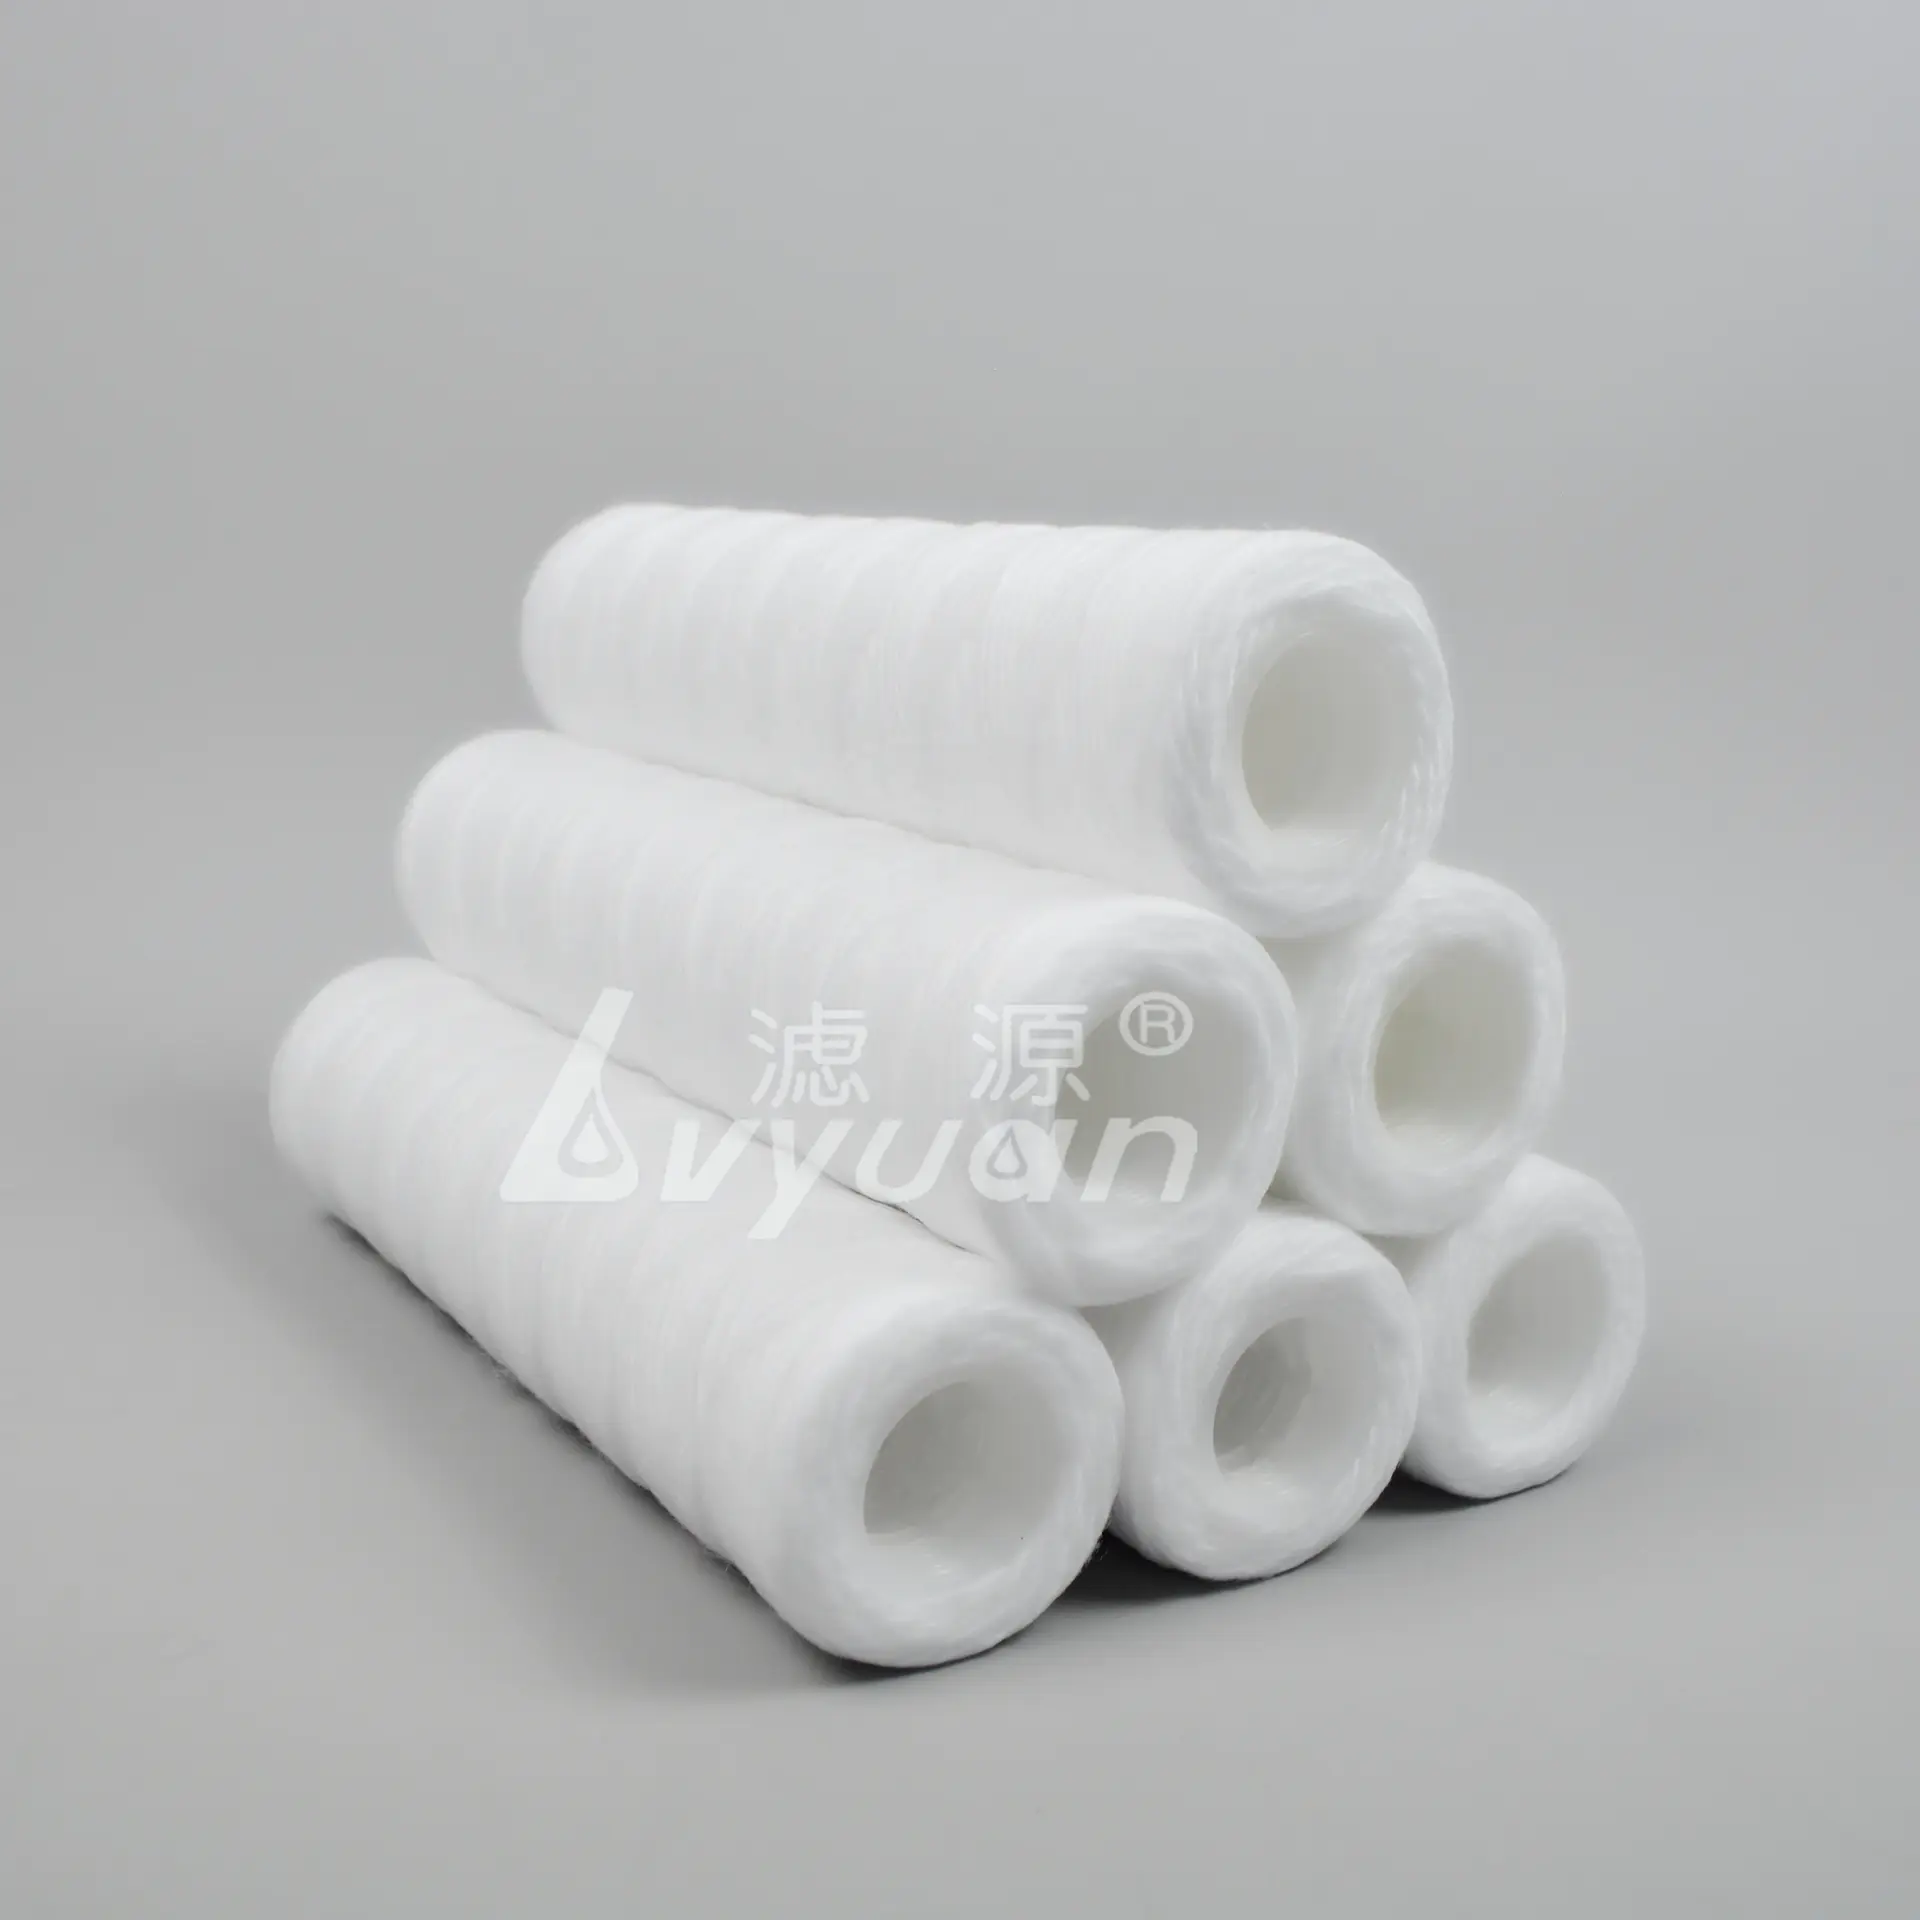 string wound filter cartridge/ pp sediment filter cartridge for water purifier 10 inch 50pcs/box DOE with pp core